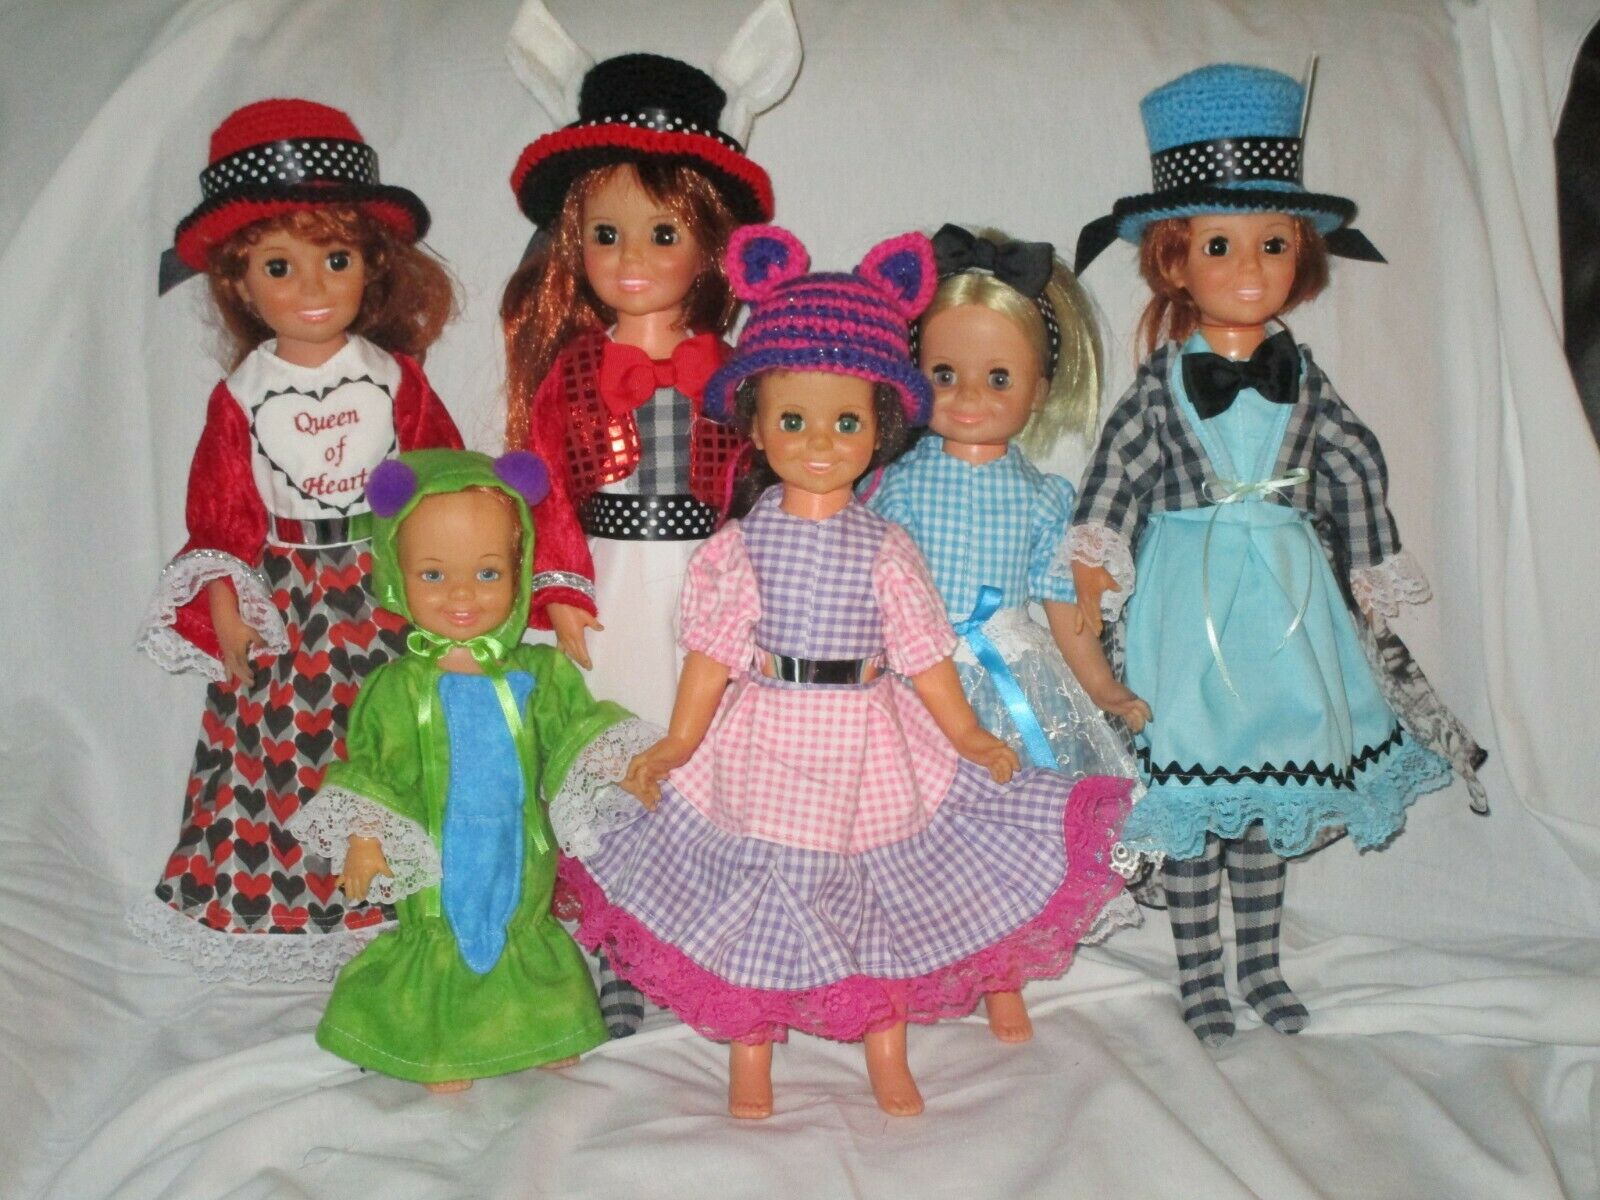 Adorable No Doll 18" Ideal Crissy No Doll Costume Lot 6 Alice In Wonderland